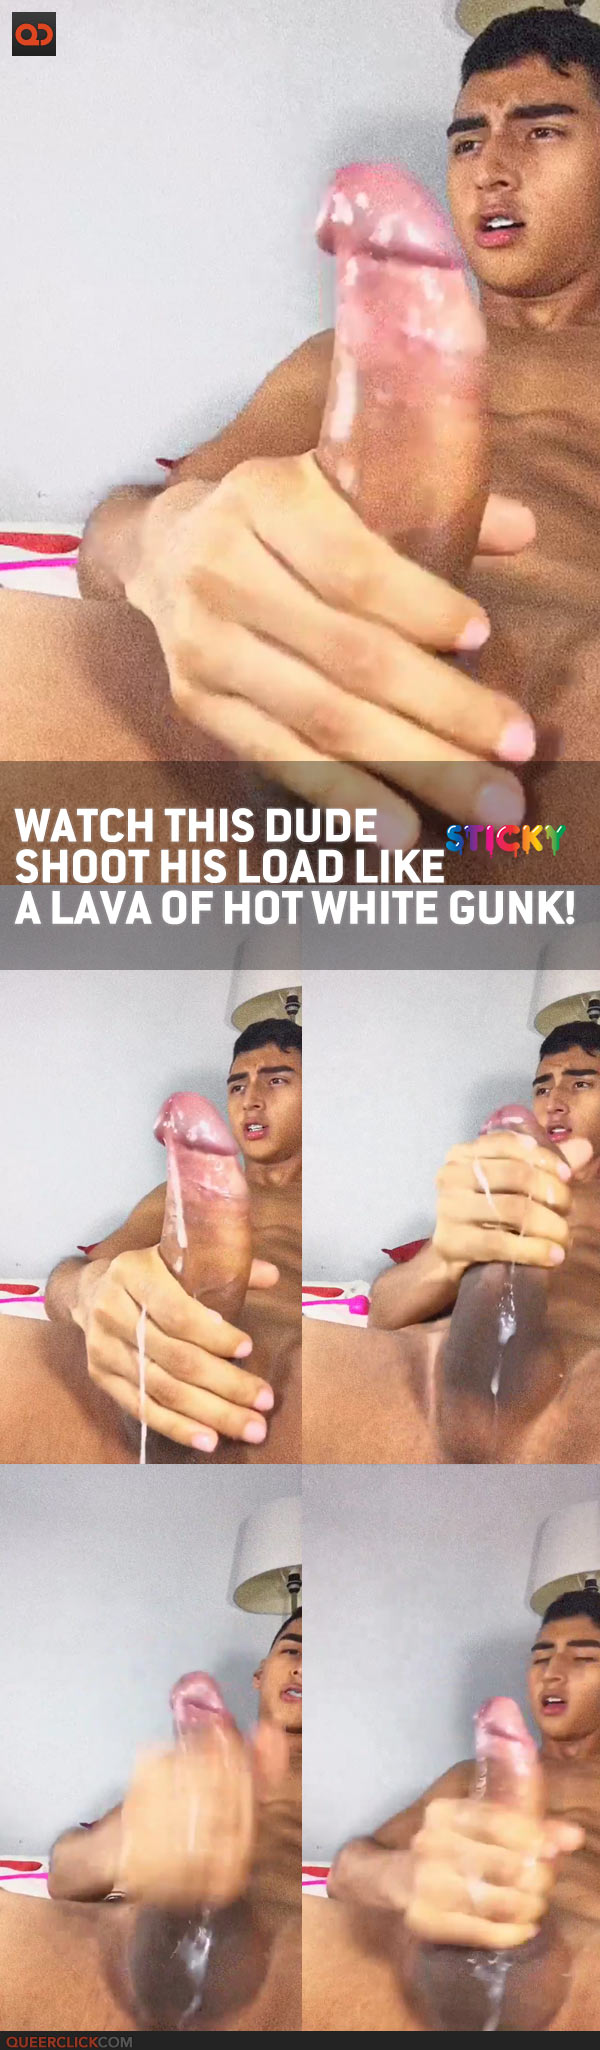 Watch This Dude Shoot His Load Like A Lava Of Hot White Gunk!